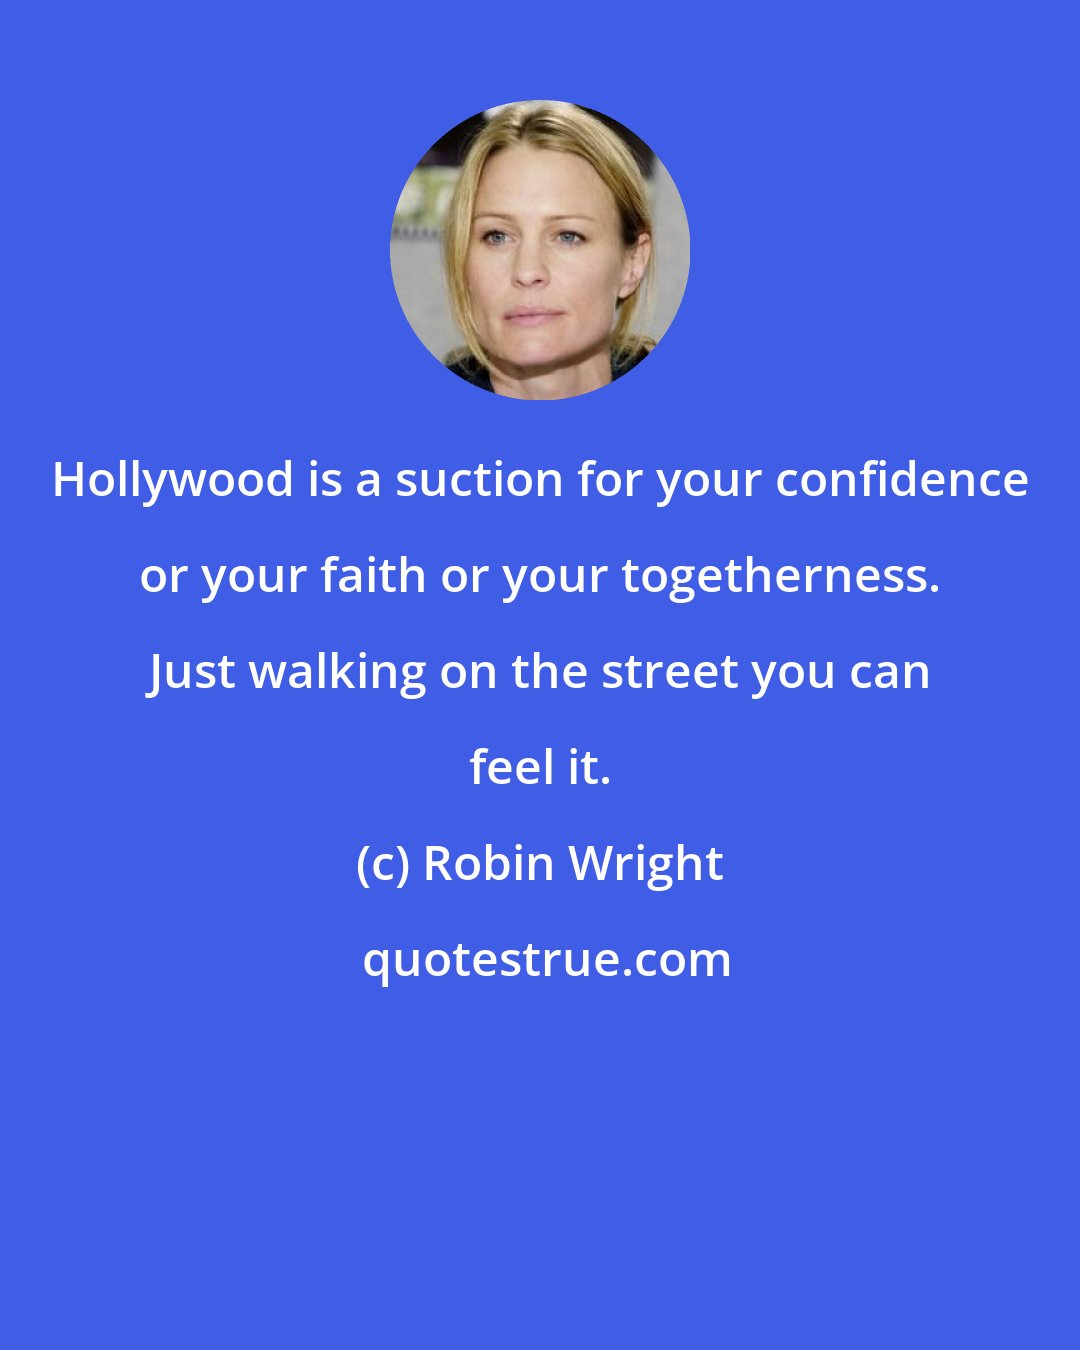 Robin Wright: Hollywood is a suction for your confidence or your faith or your togetherness. Just walking on the street you can feel it.